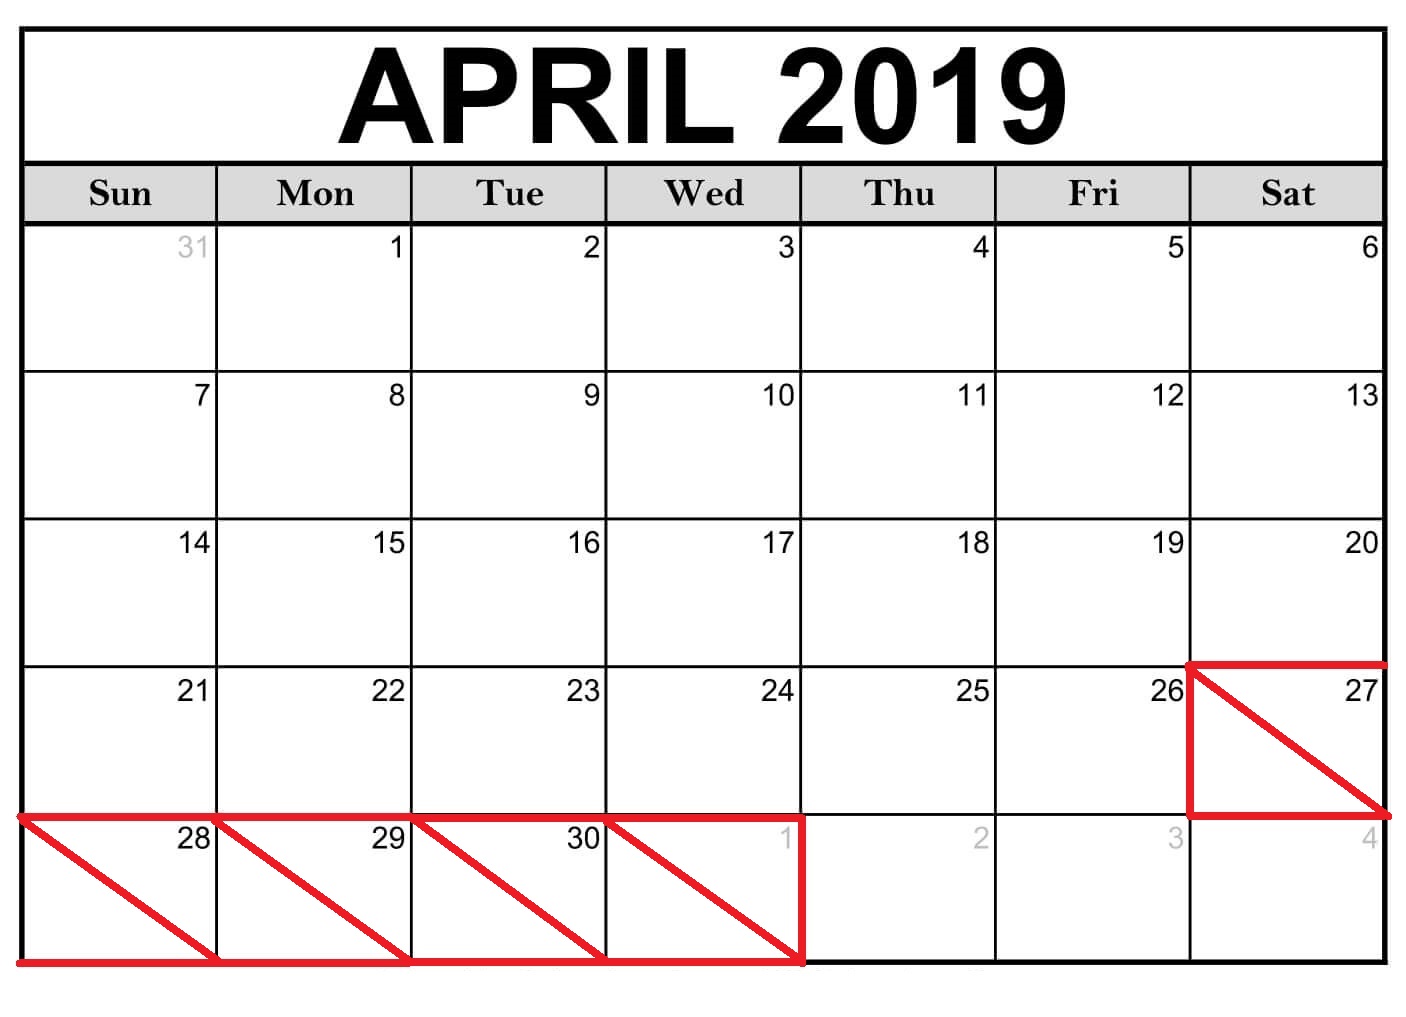 Vietnam Immigration Department Will Be Closed From 27 April to 01 May, 2019